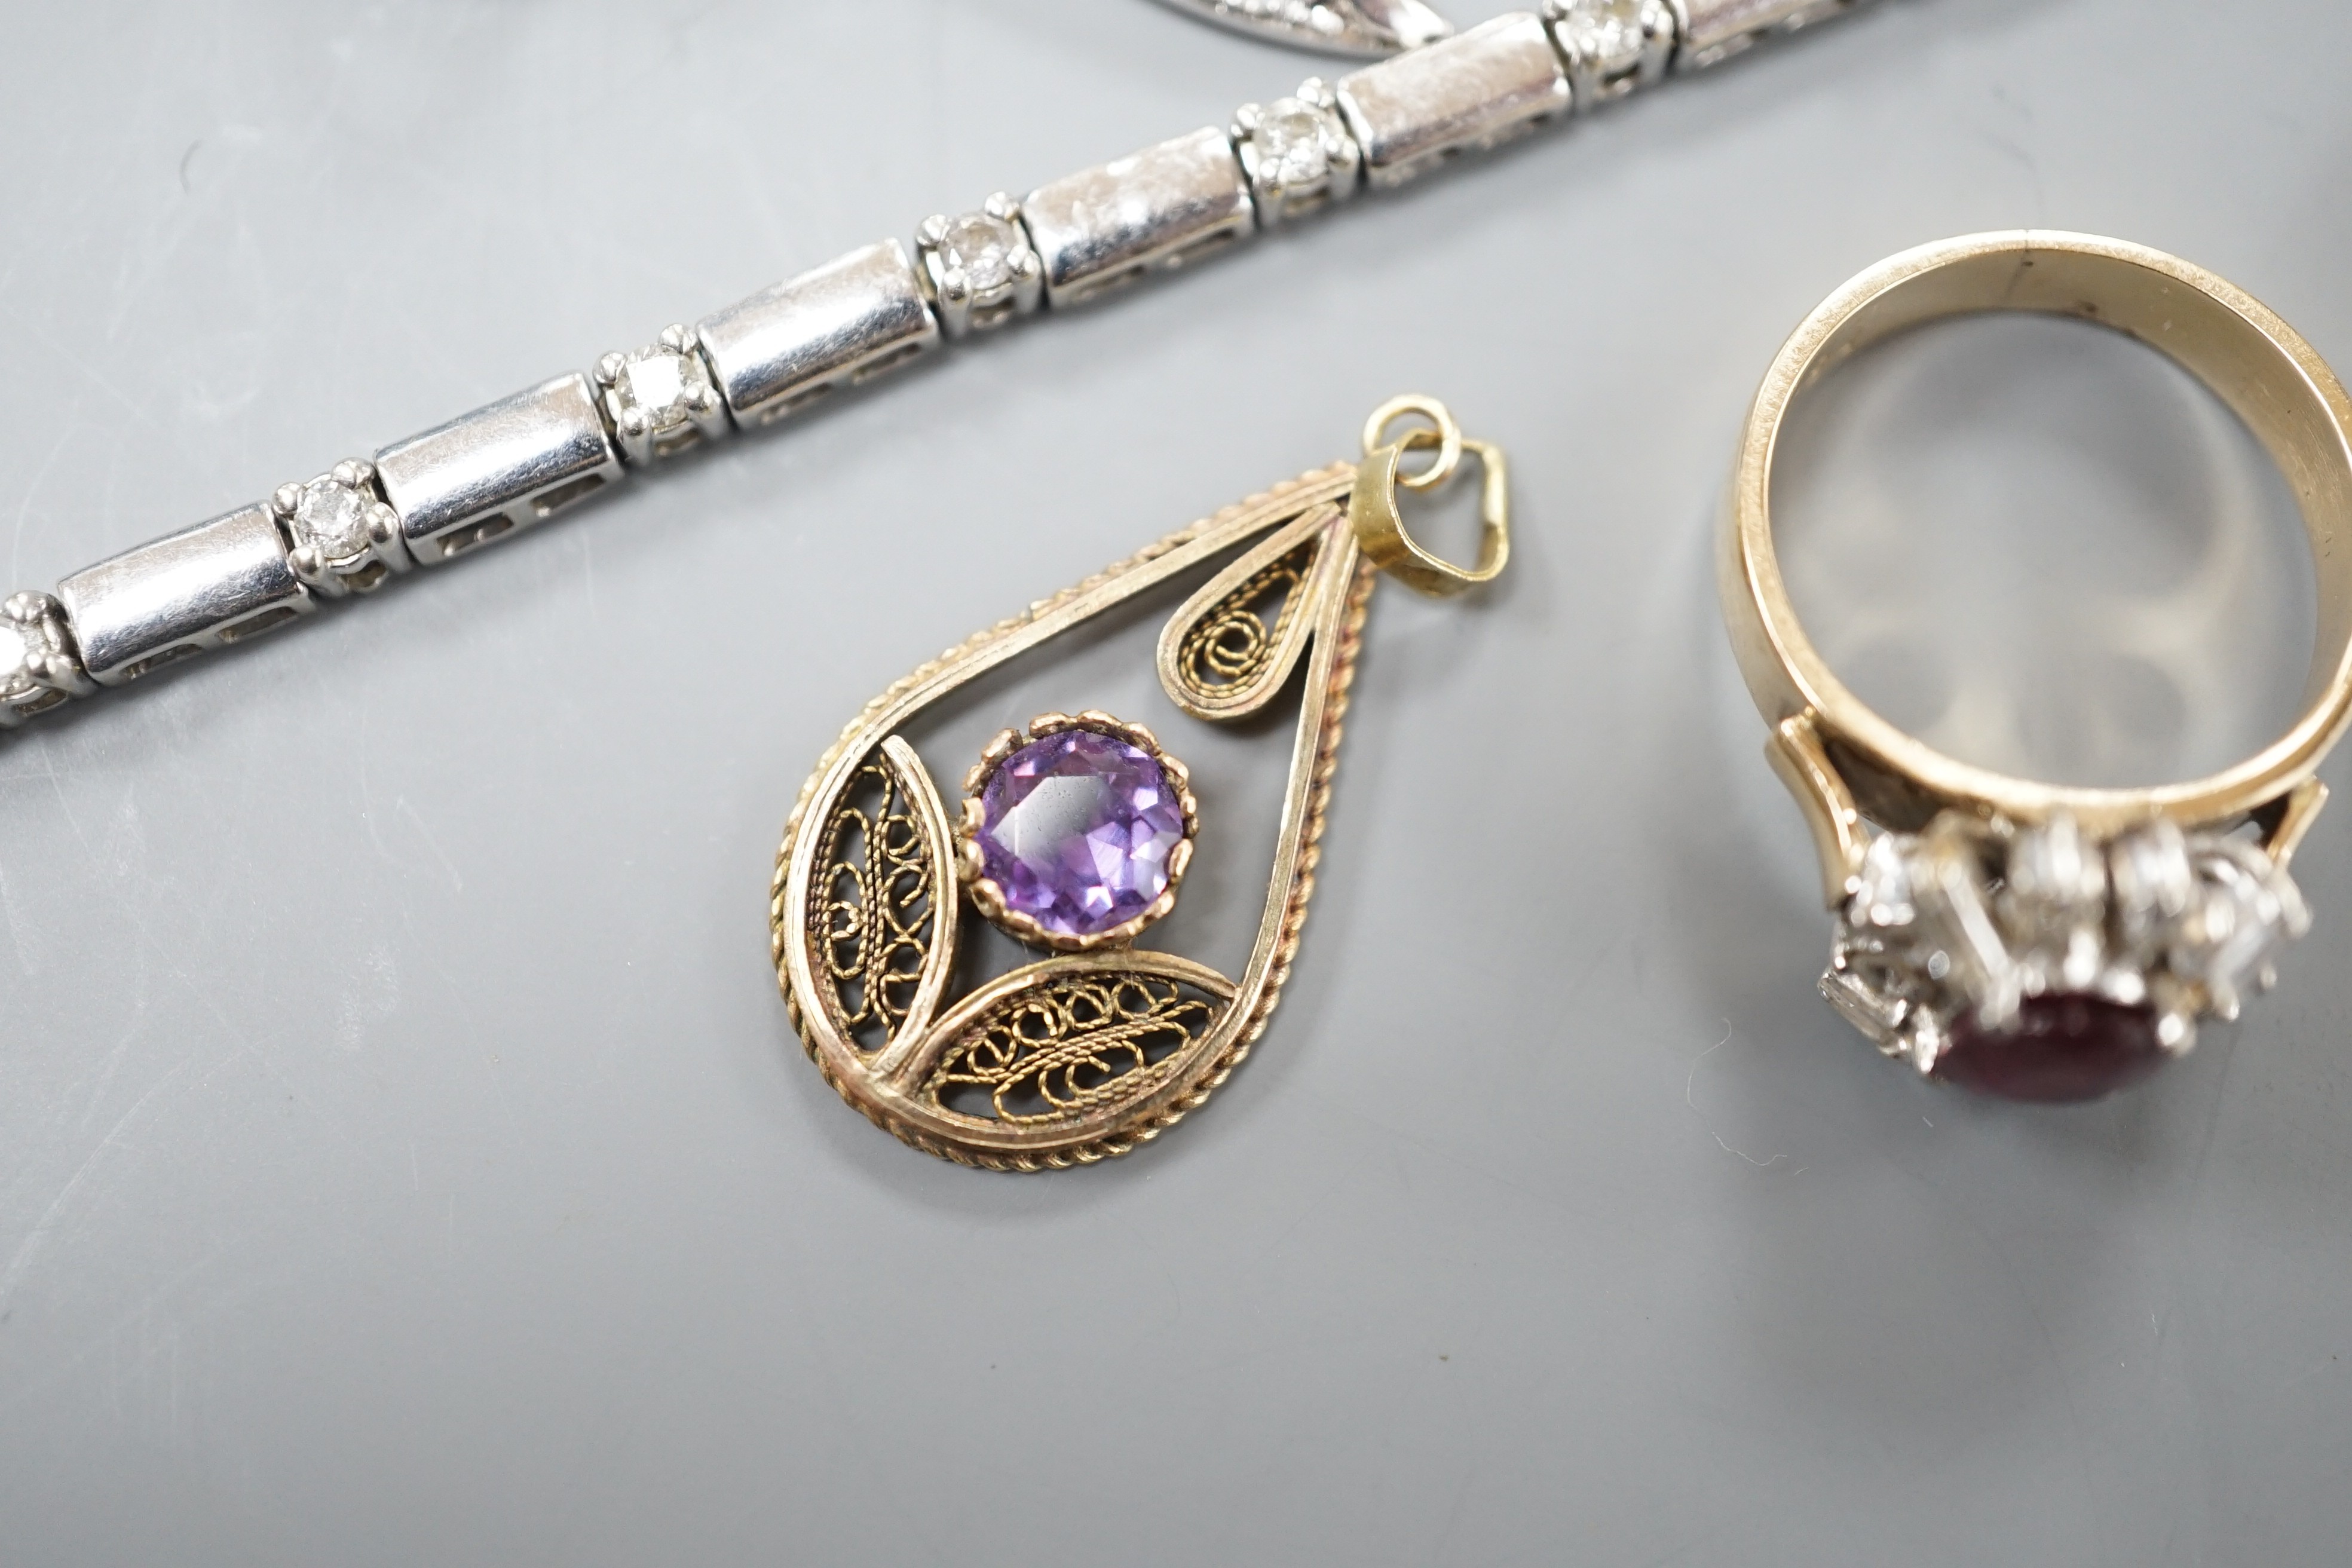 A 9kt white metal and diamond set bracelet, a 9ct mounted agate brooch, two rings including 18k, two pendants and a pair of modern diamond set ear studs.